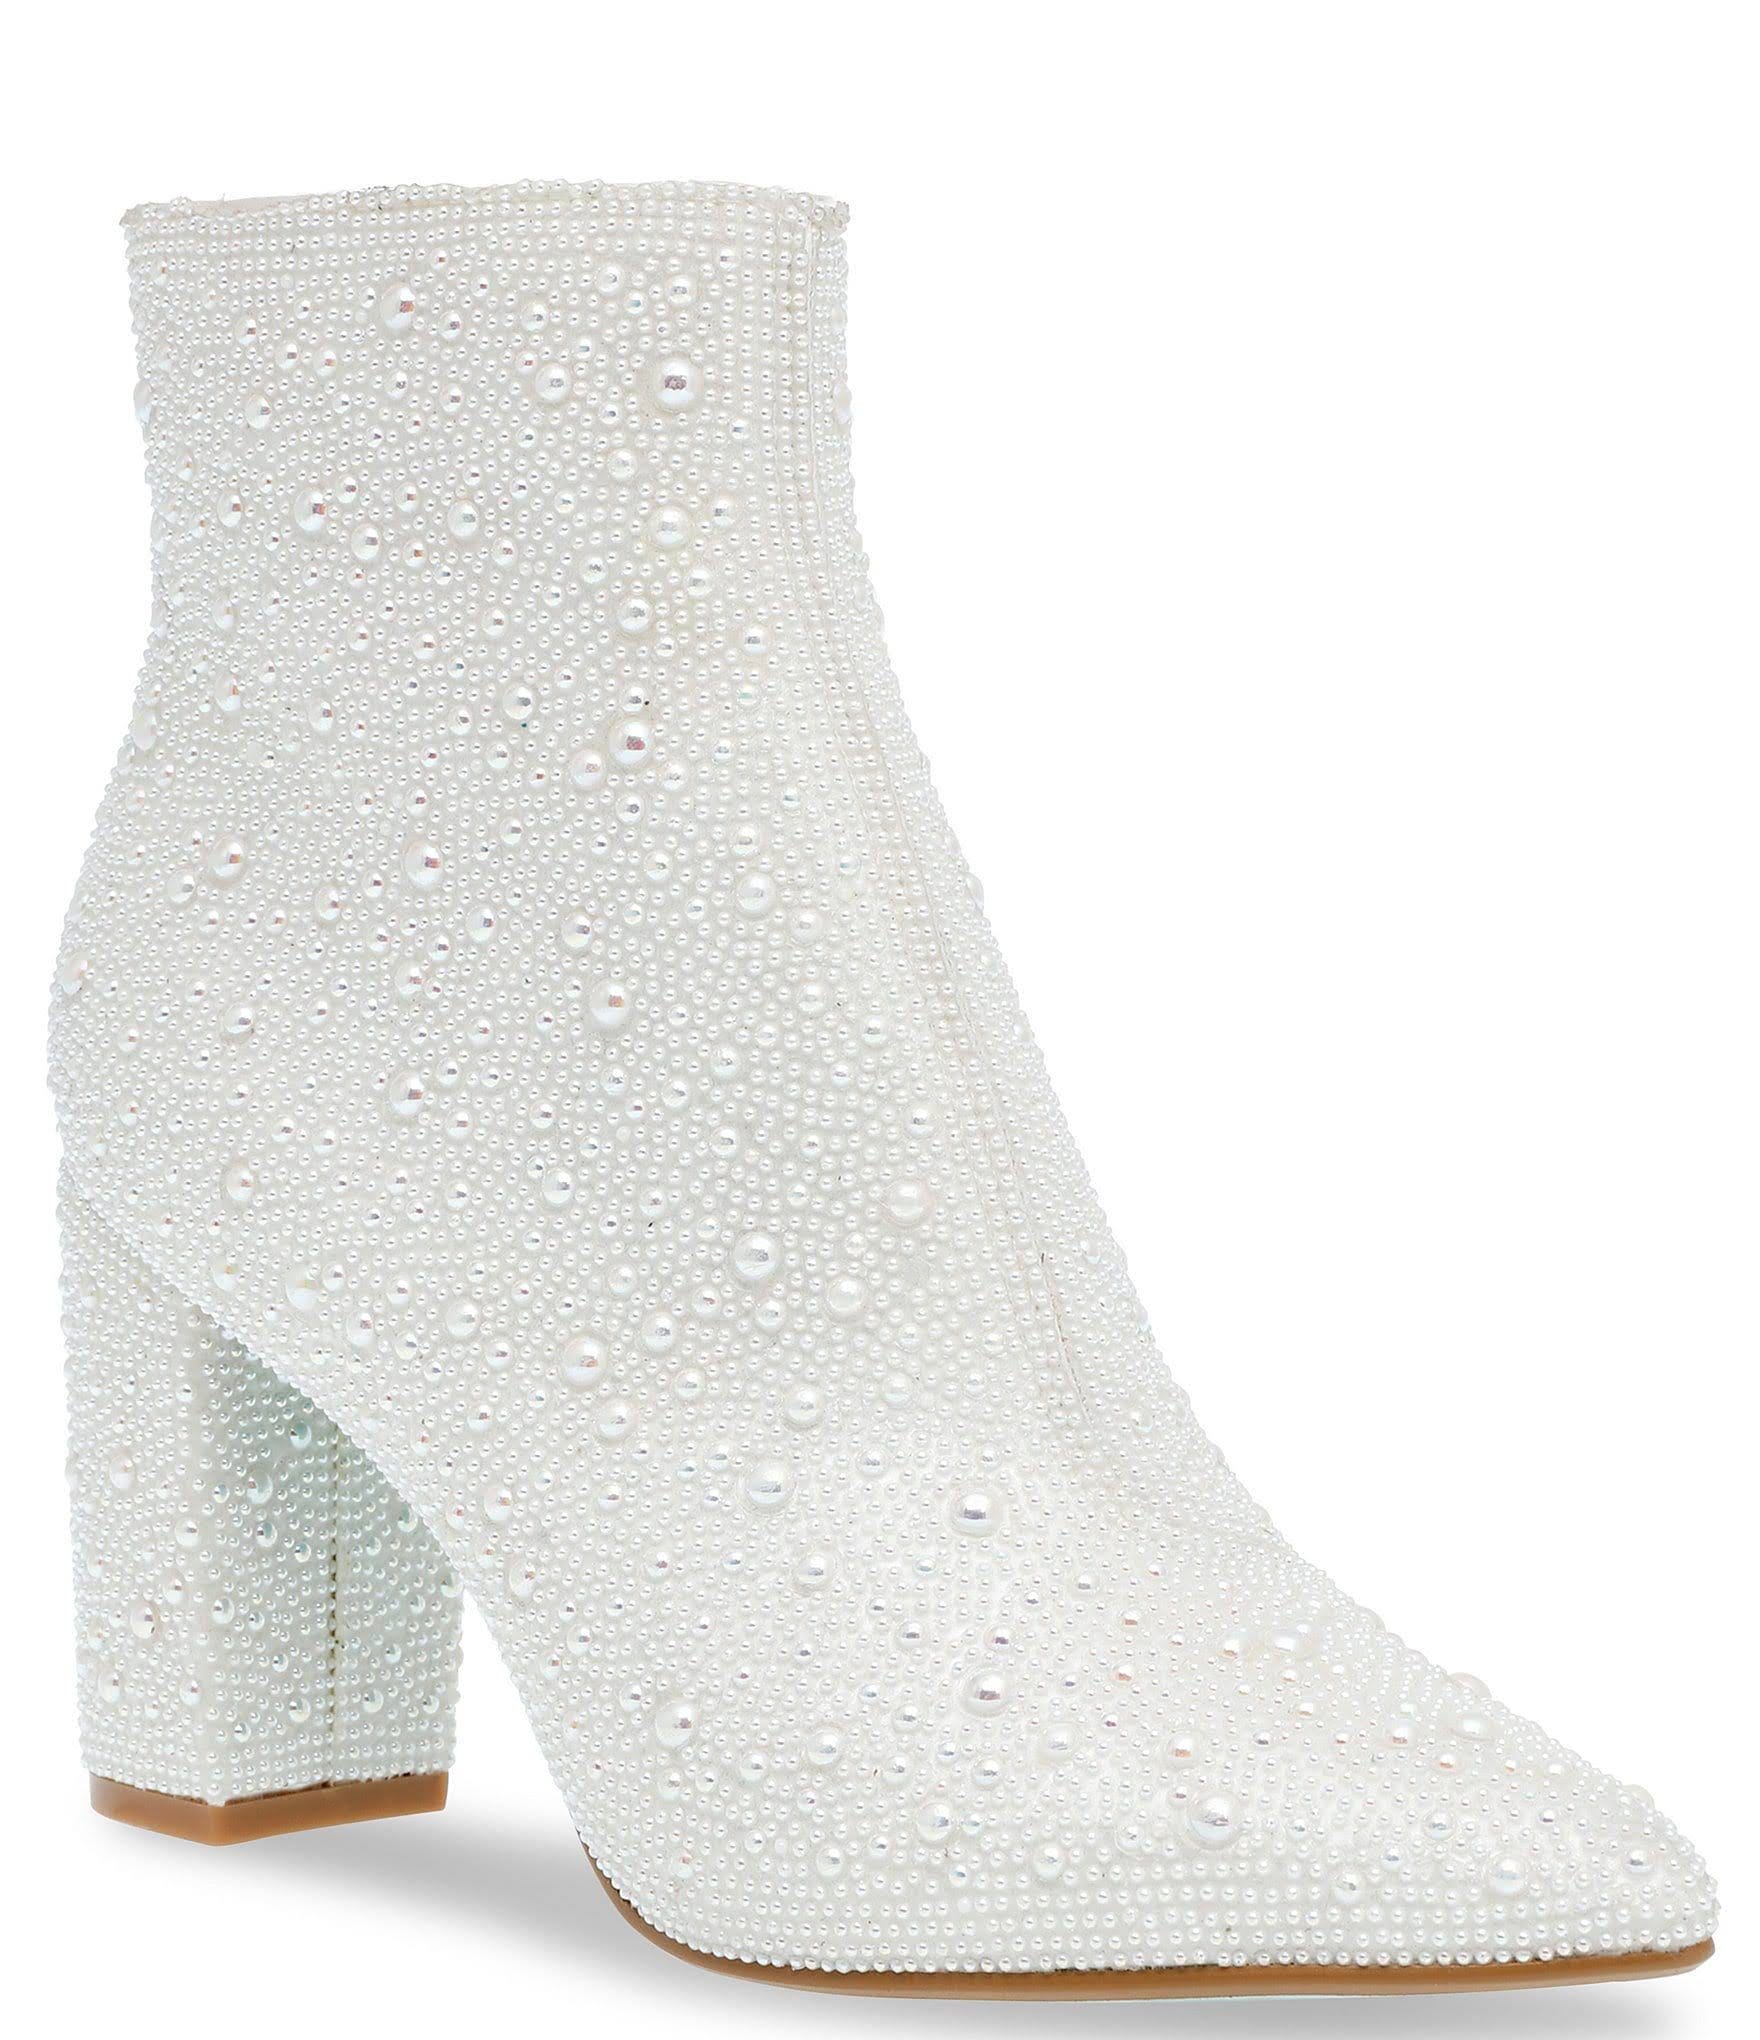 Betsey Johnson Cady Pearl Embellished White Ankle Booties | Image